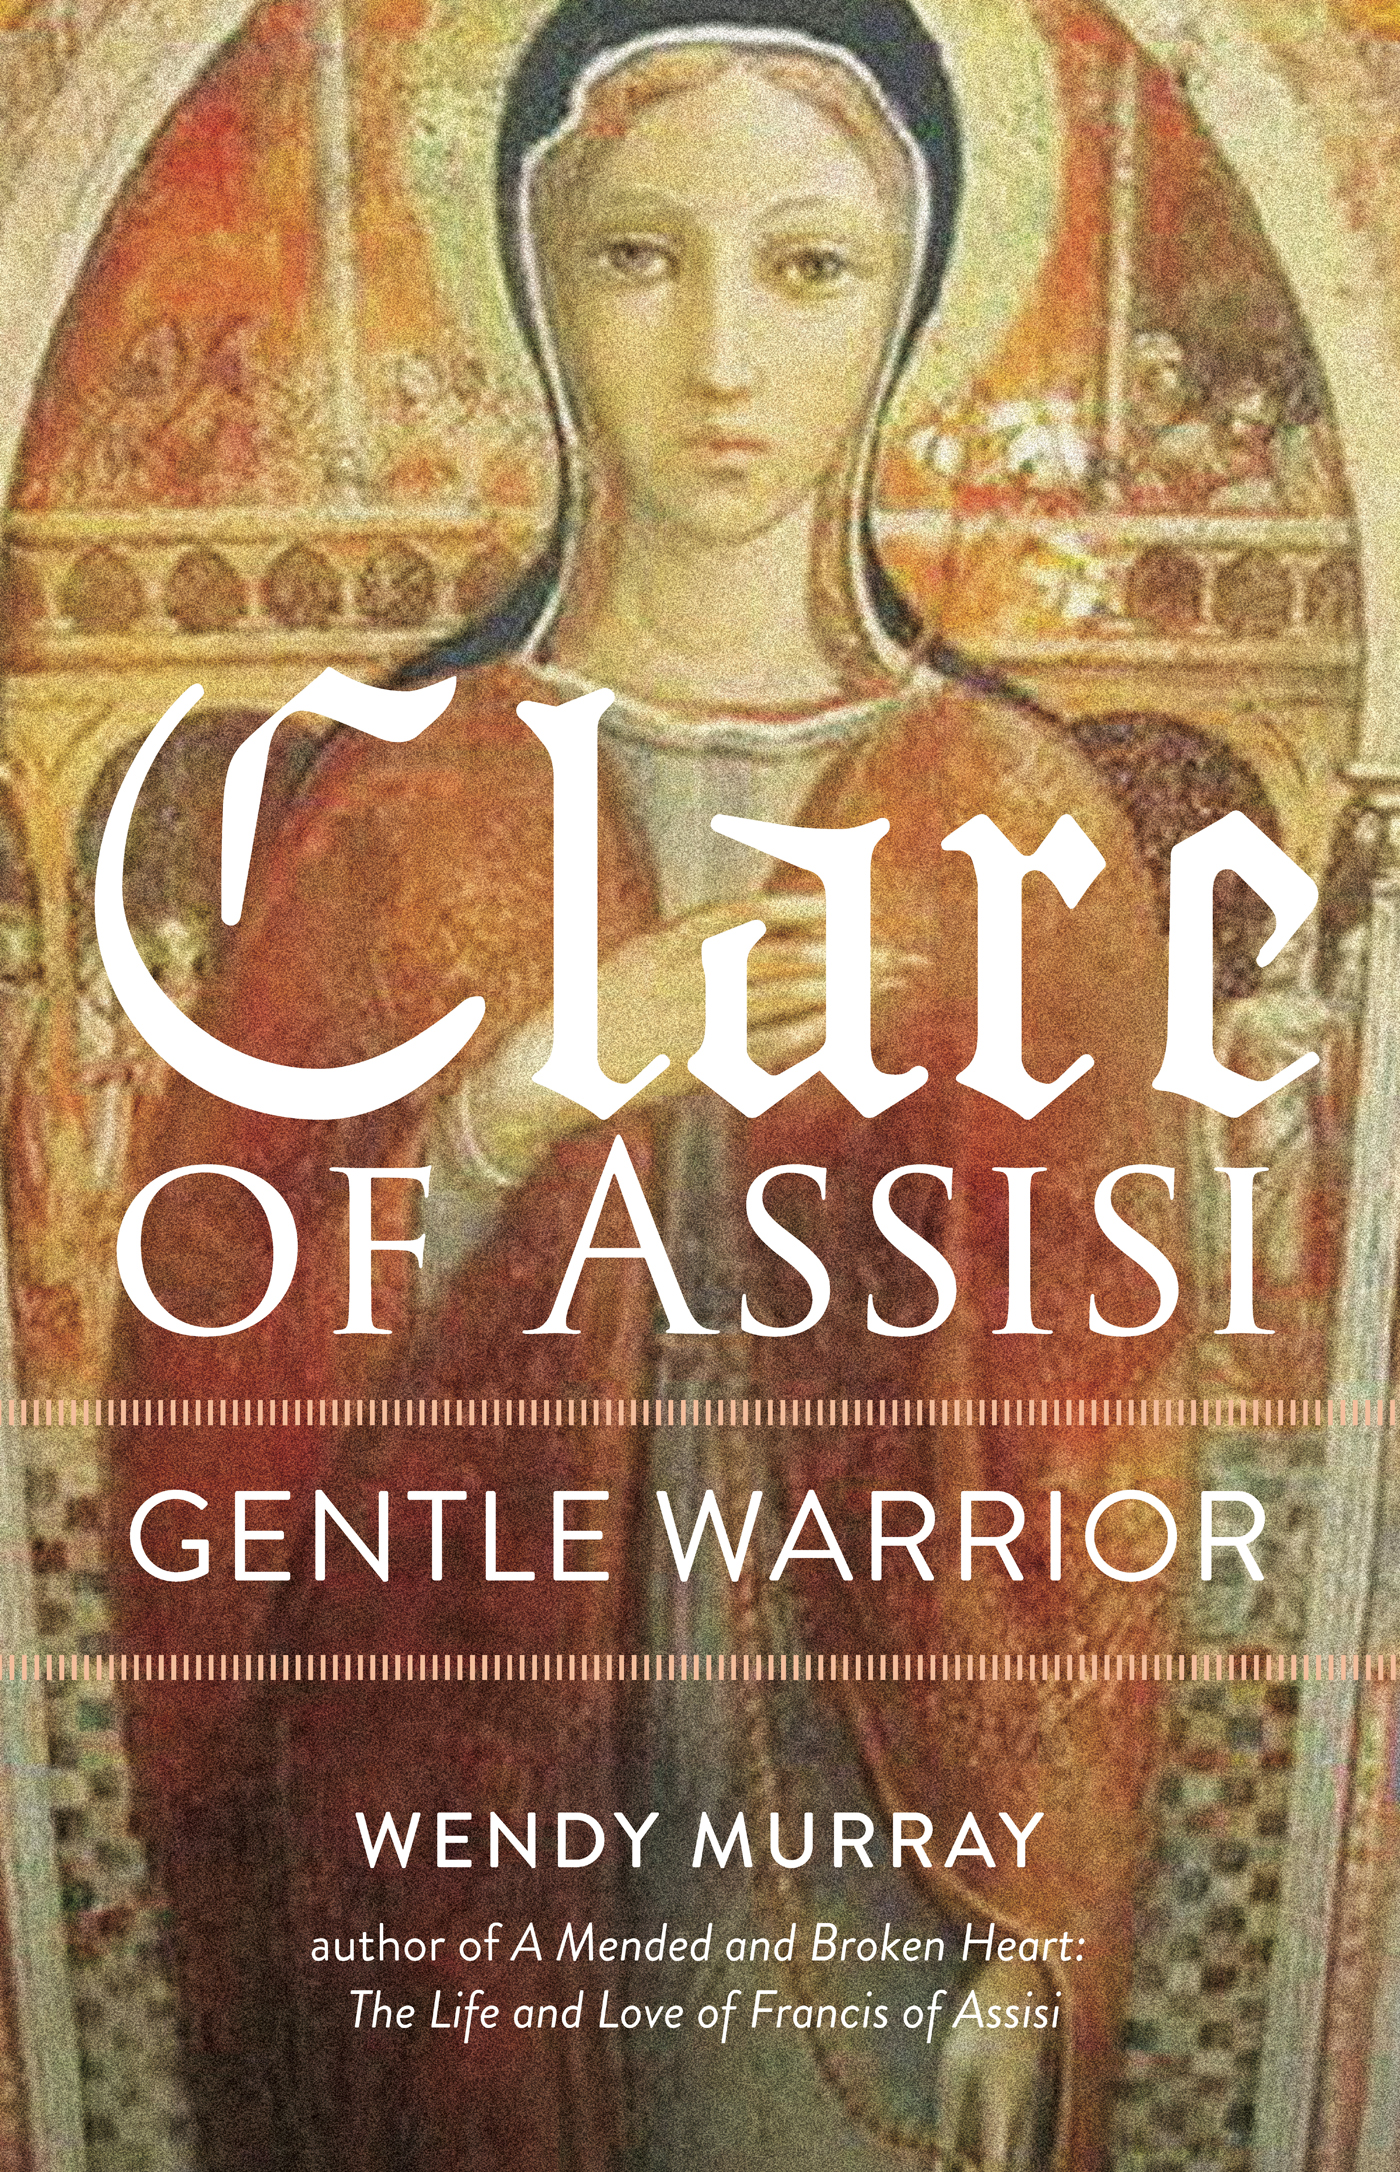 Clare OF ASSISI GENTLE WARRIOR WENDY MURRAY - photo 1